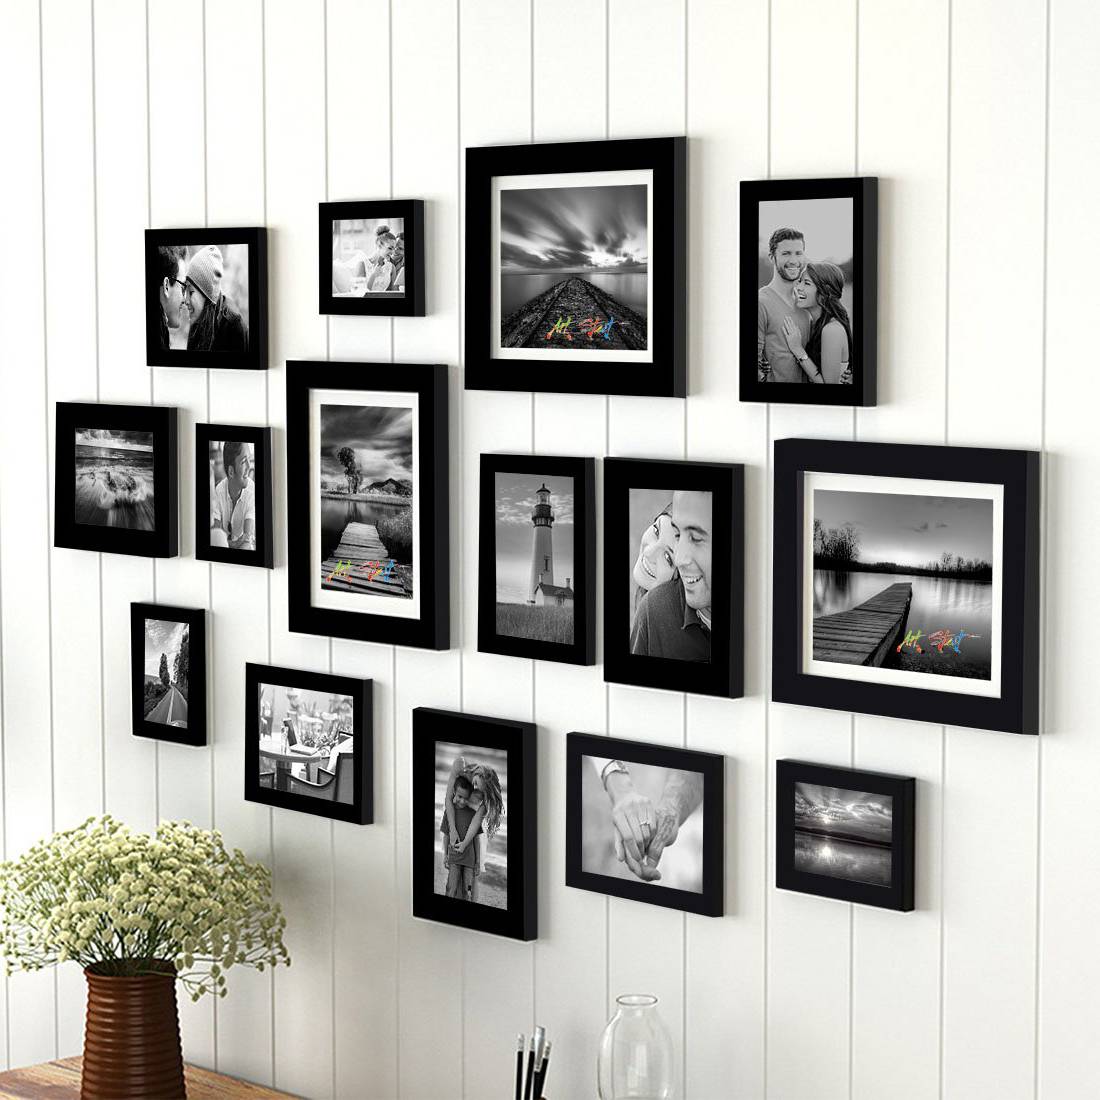  Try Black and White Photo Frames